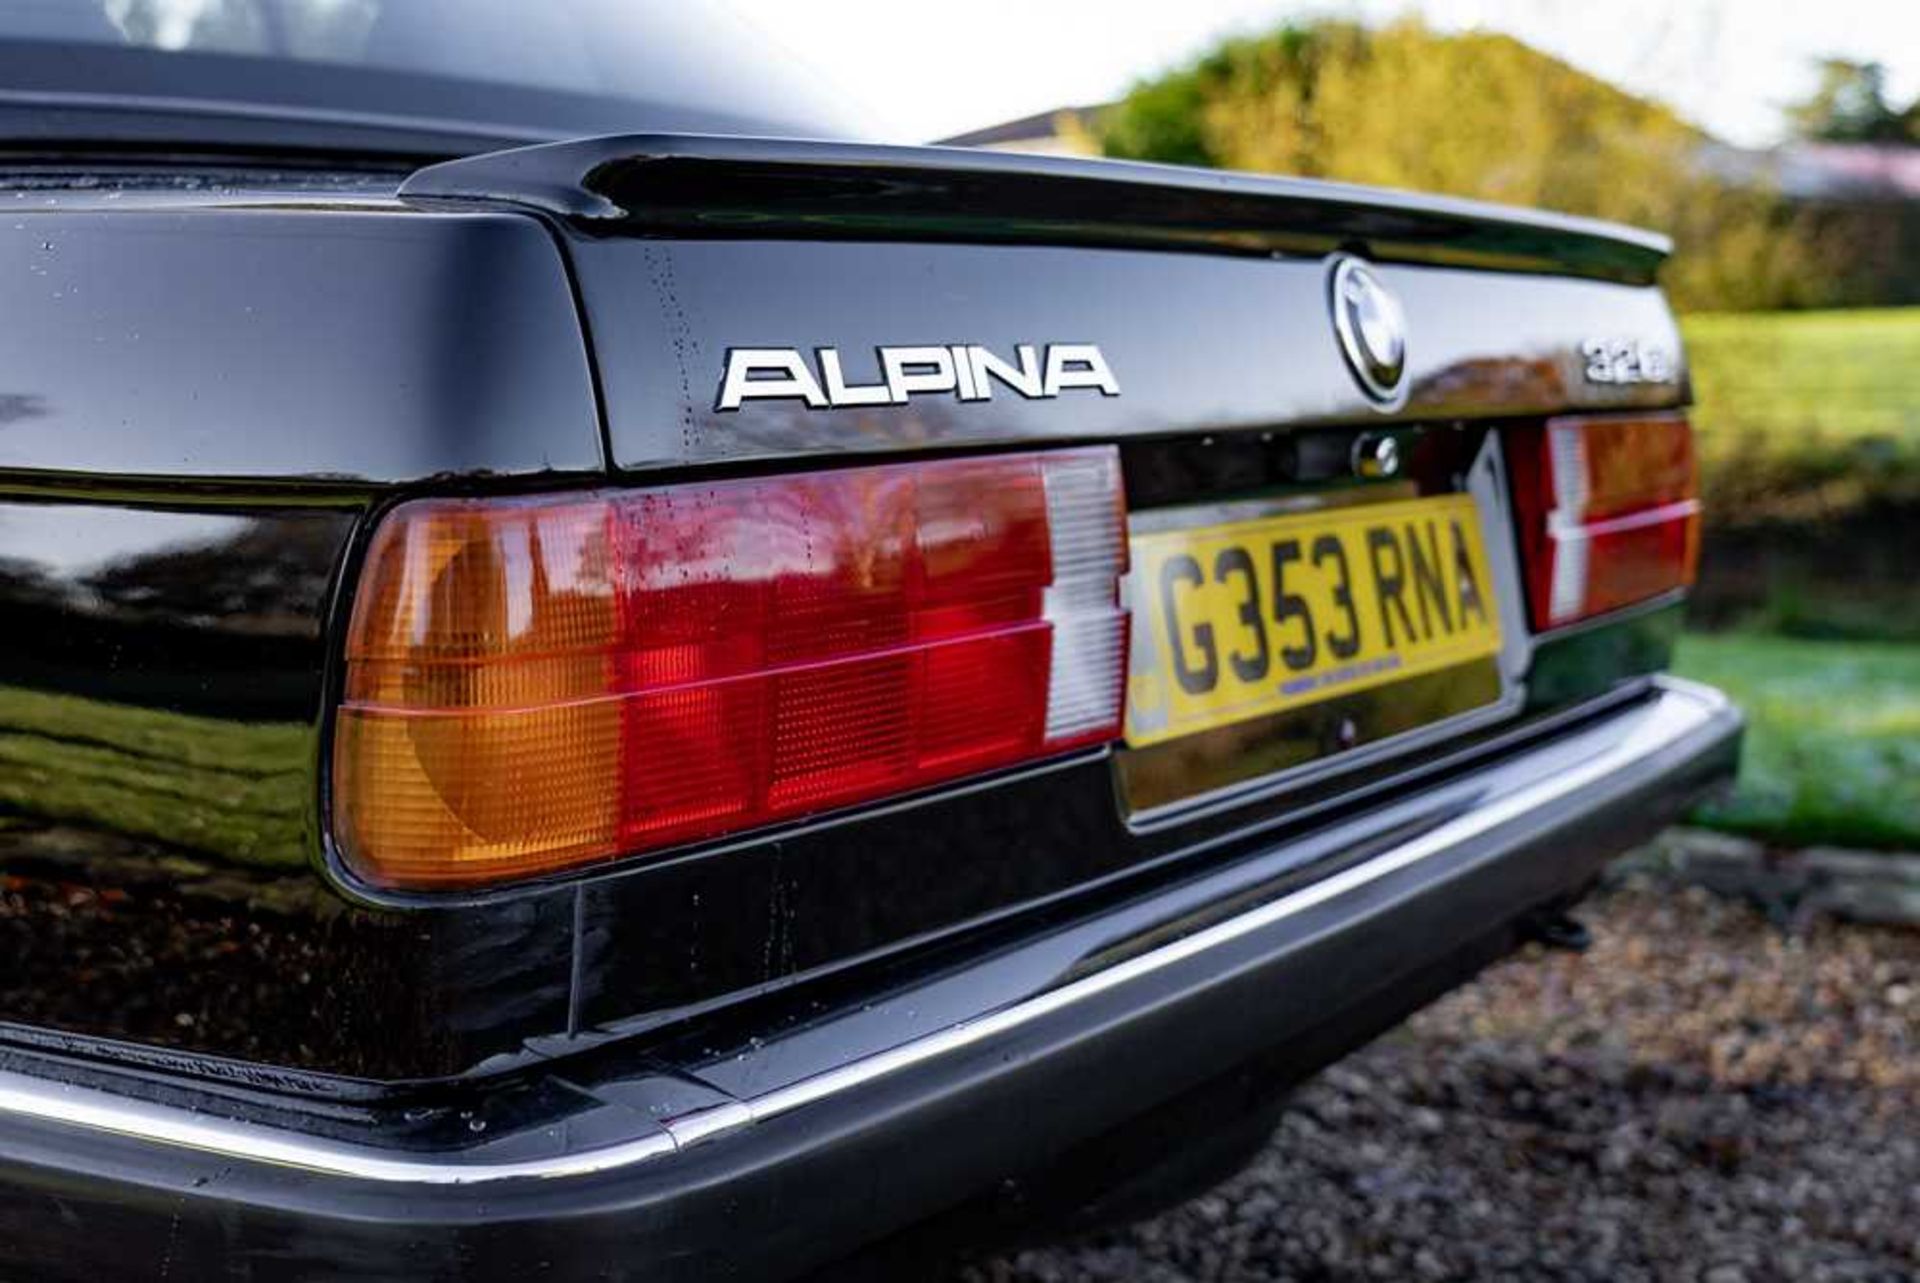 1989 BMW 320i Convertible Converted to Alpina 328i Specification - Image 26 of 51